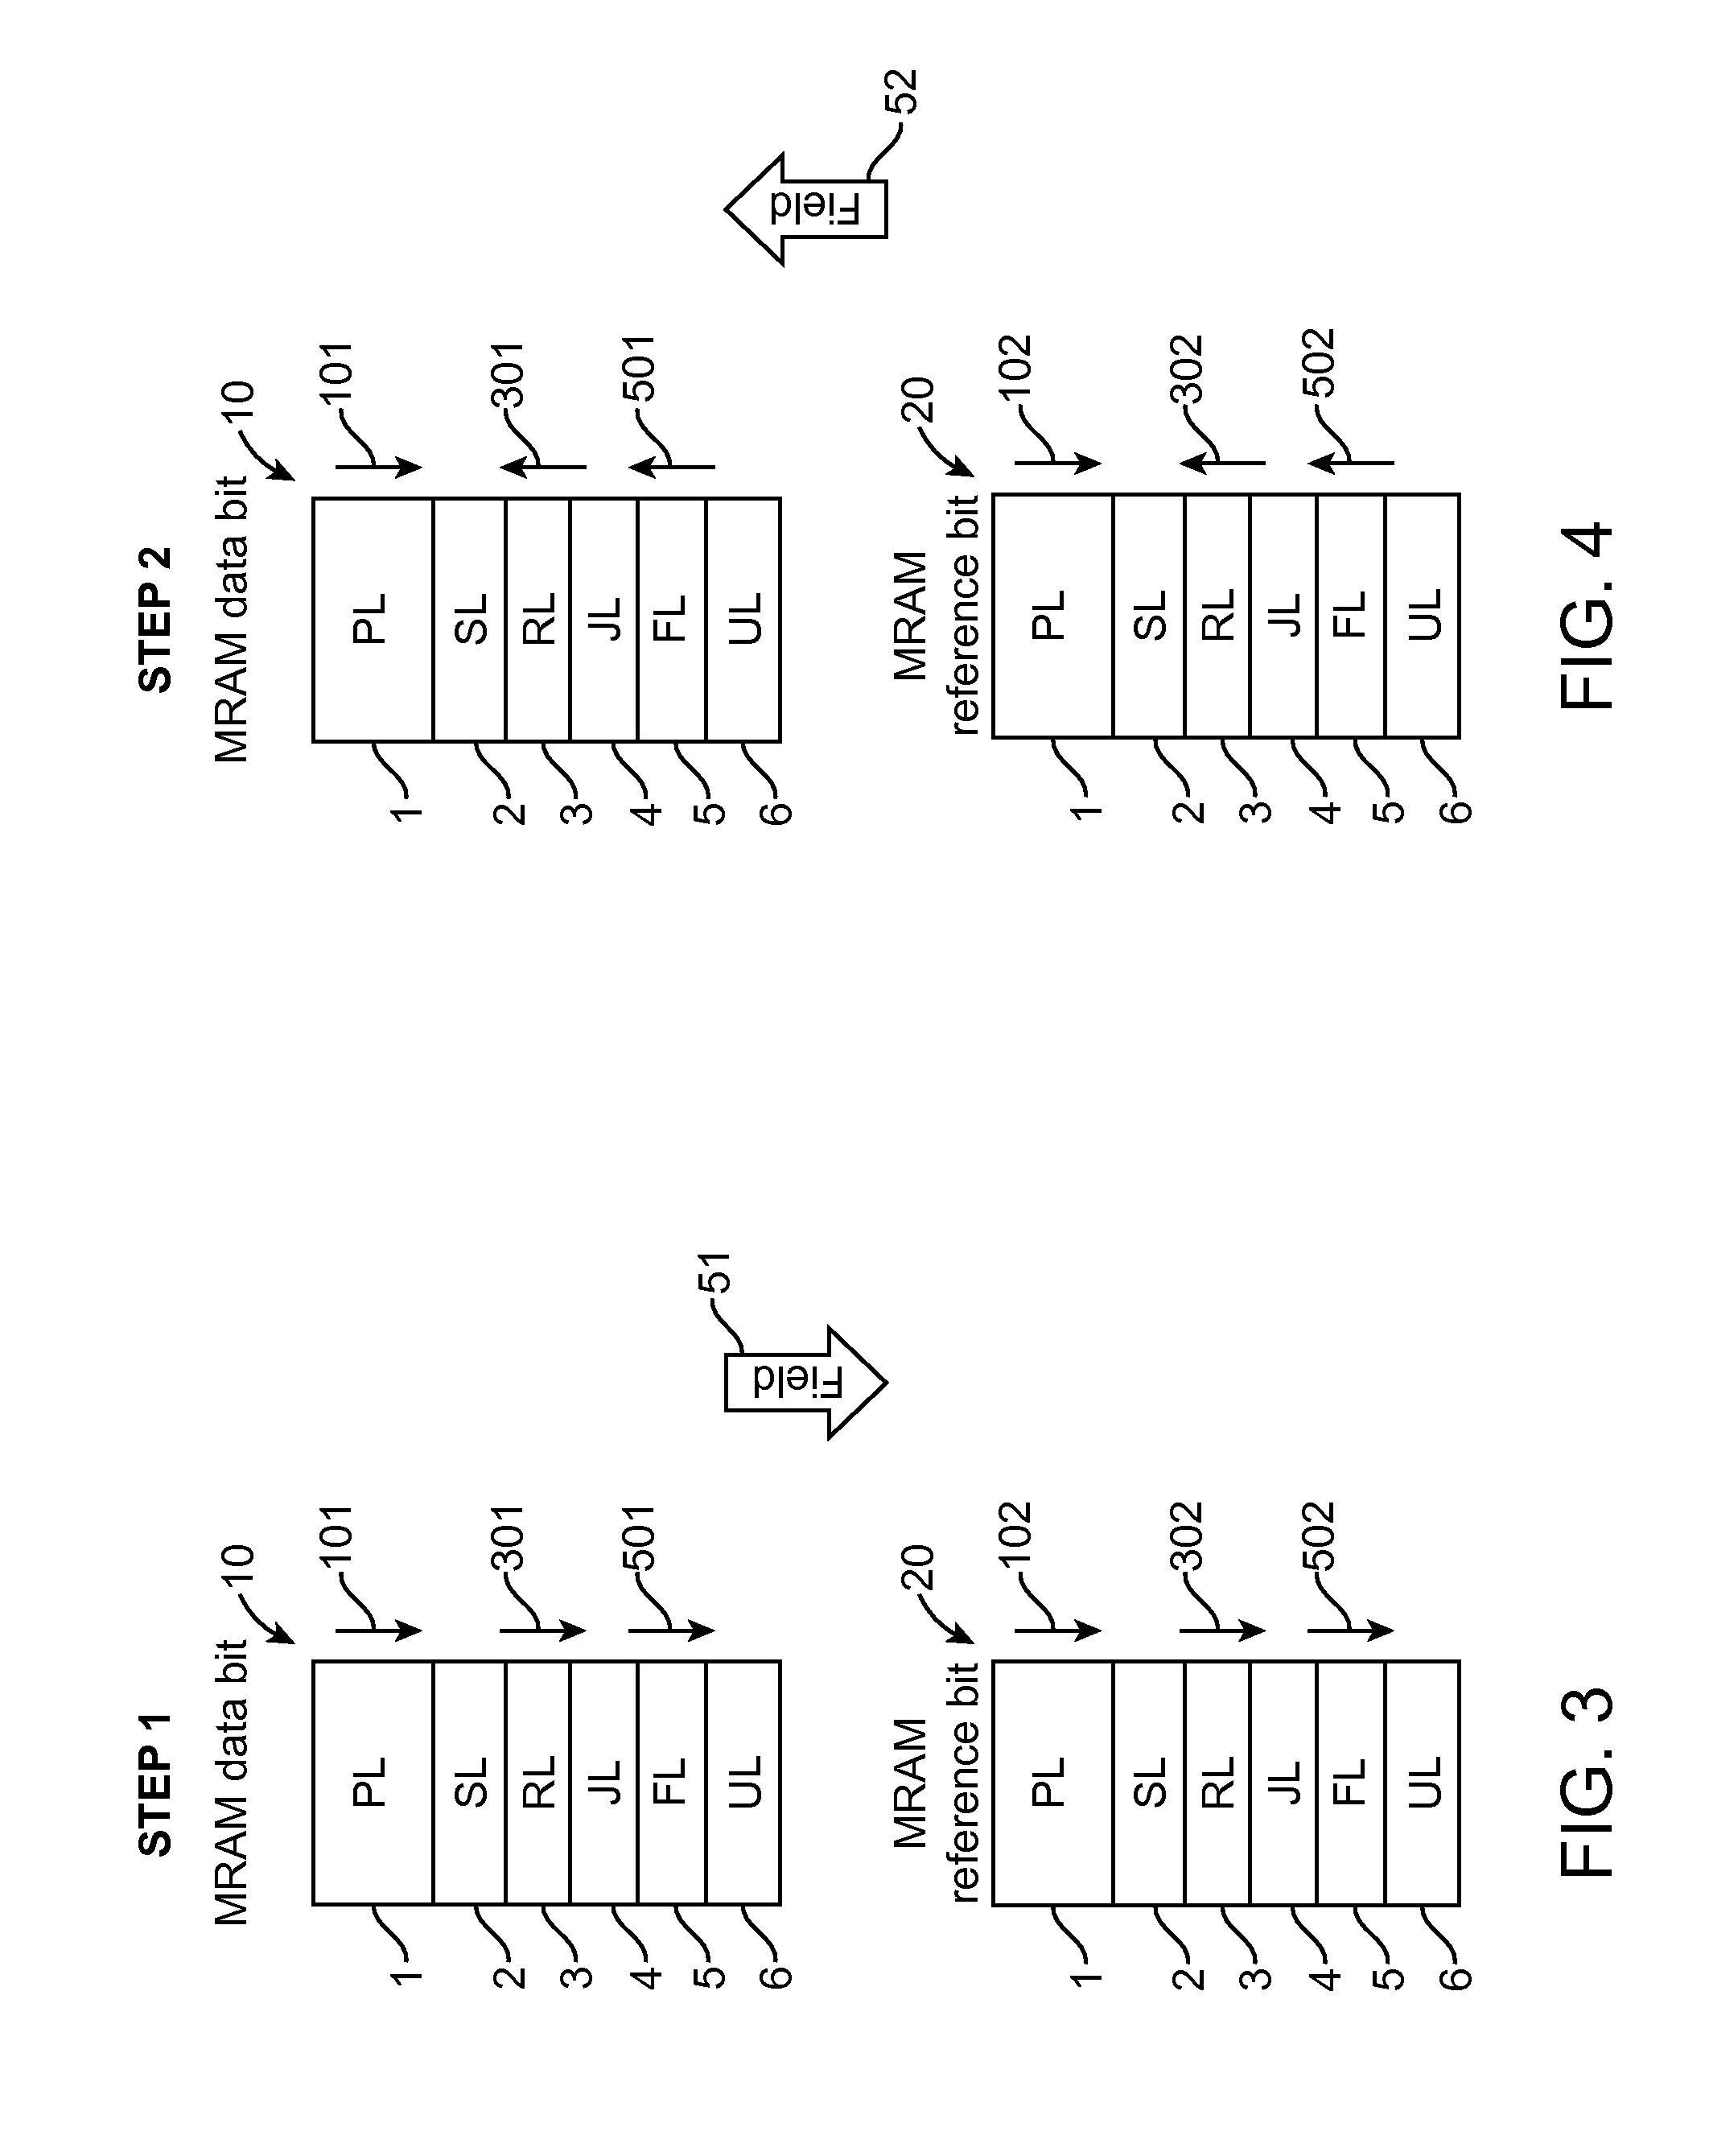 Perpendicular magnetic random access memory (MRAM) device with a stable reference cell